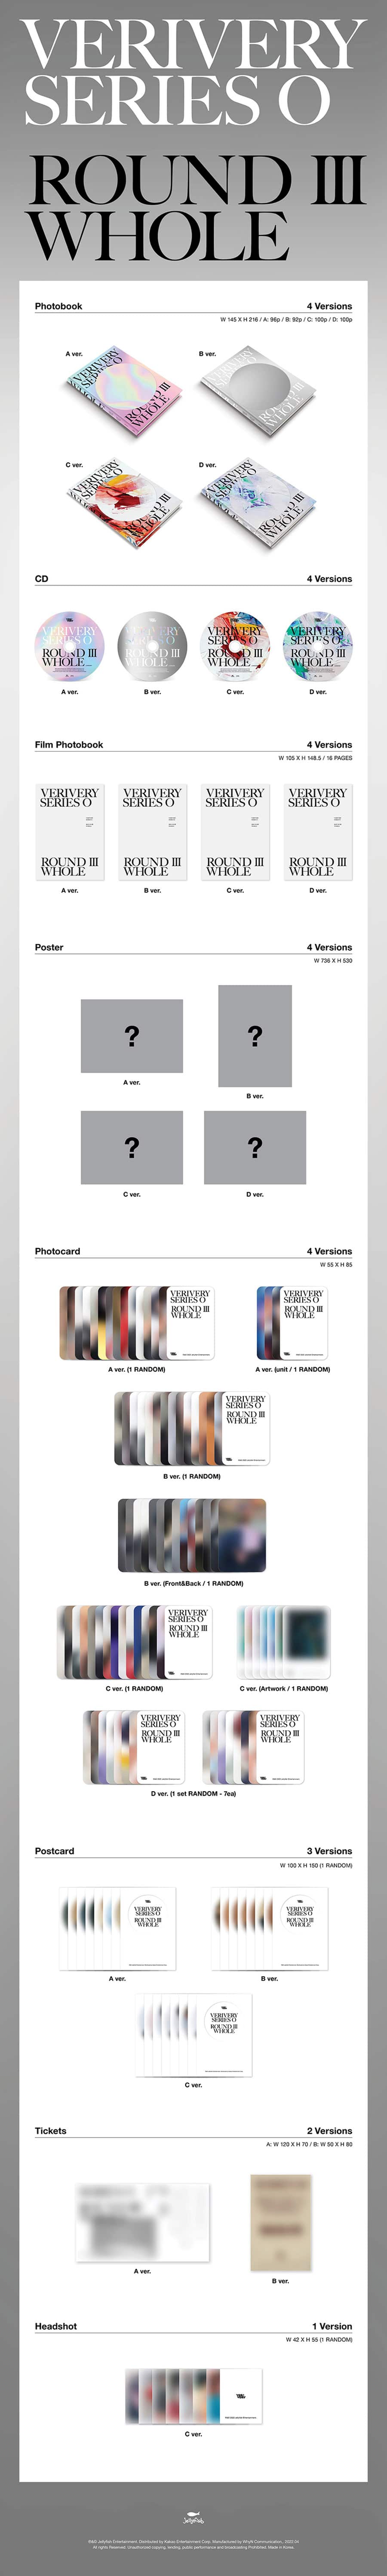 verivery-1st-full-album-series-o-round-3-whole-wholesale